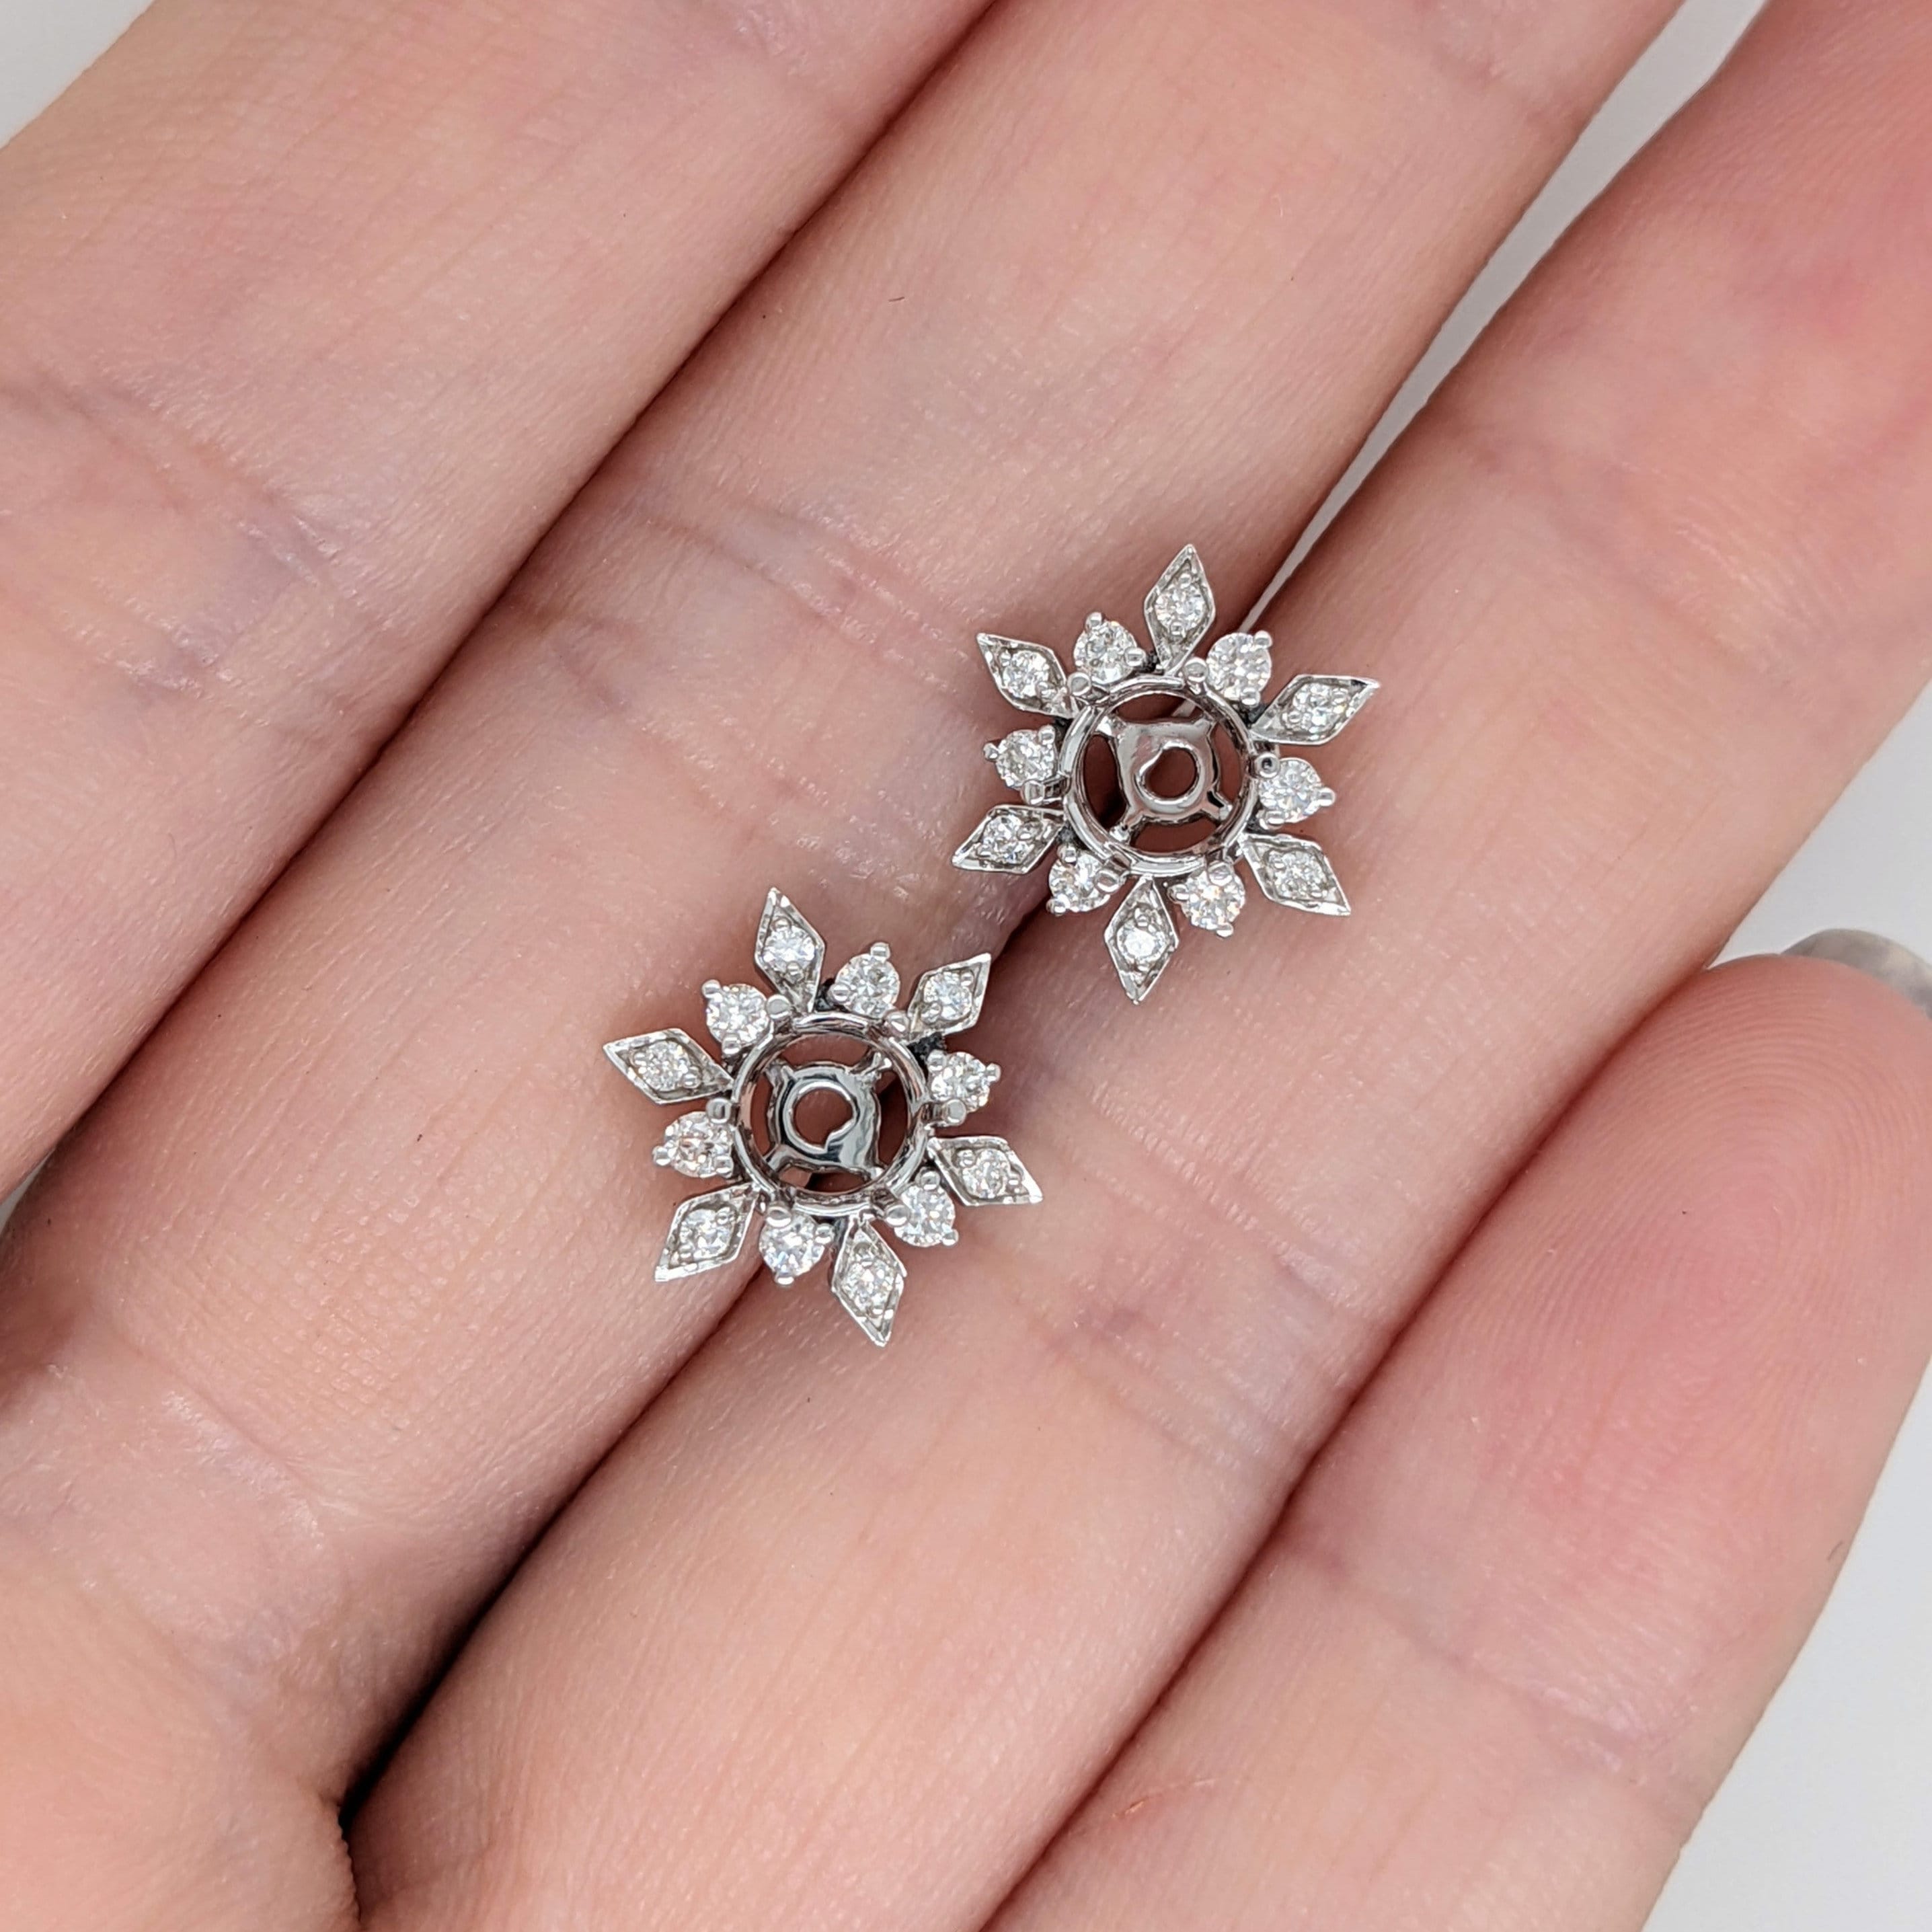 Stud Earrings-Snowflake Design Stud Earring Semi-Mount in 14k Solid Gold w Diamond Accents | Round 5mm | Secure Push Backs | Customizable - NNJGemstones